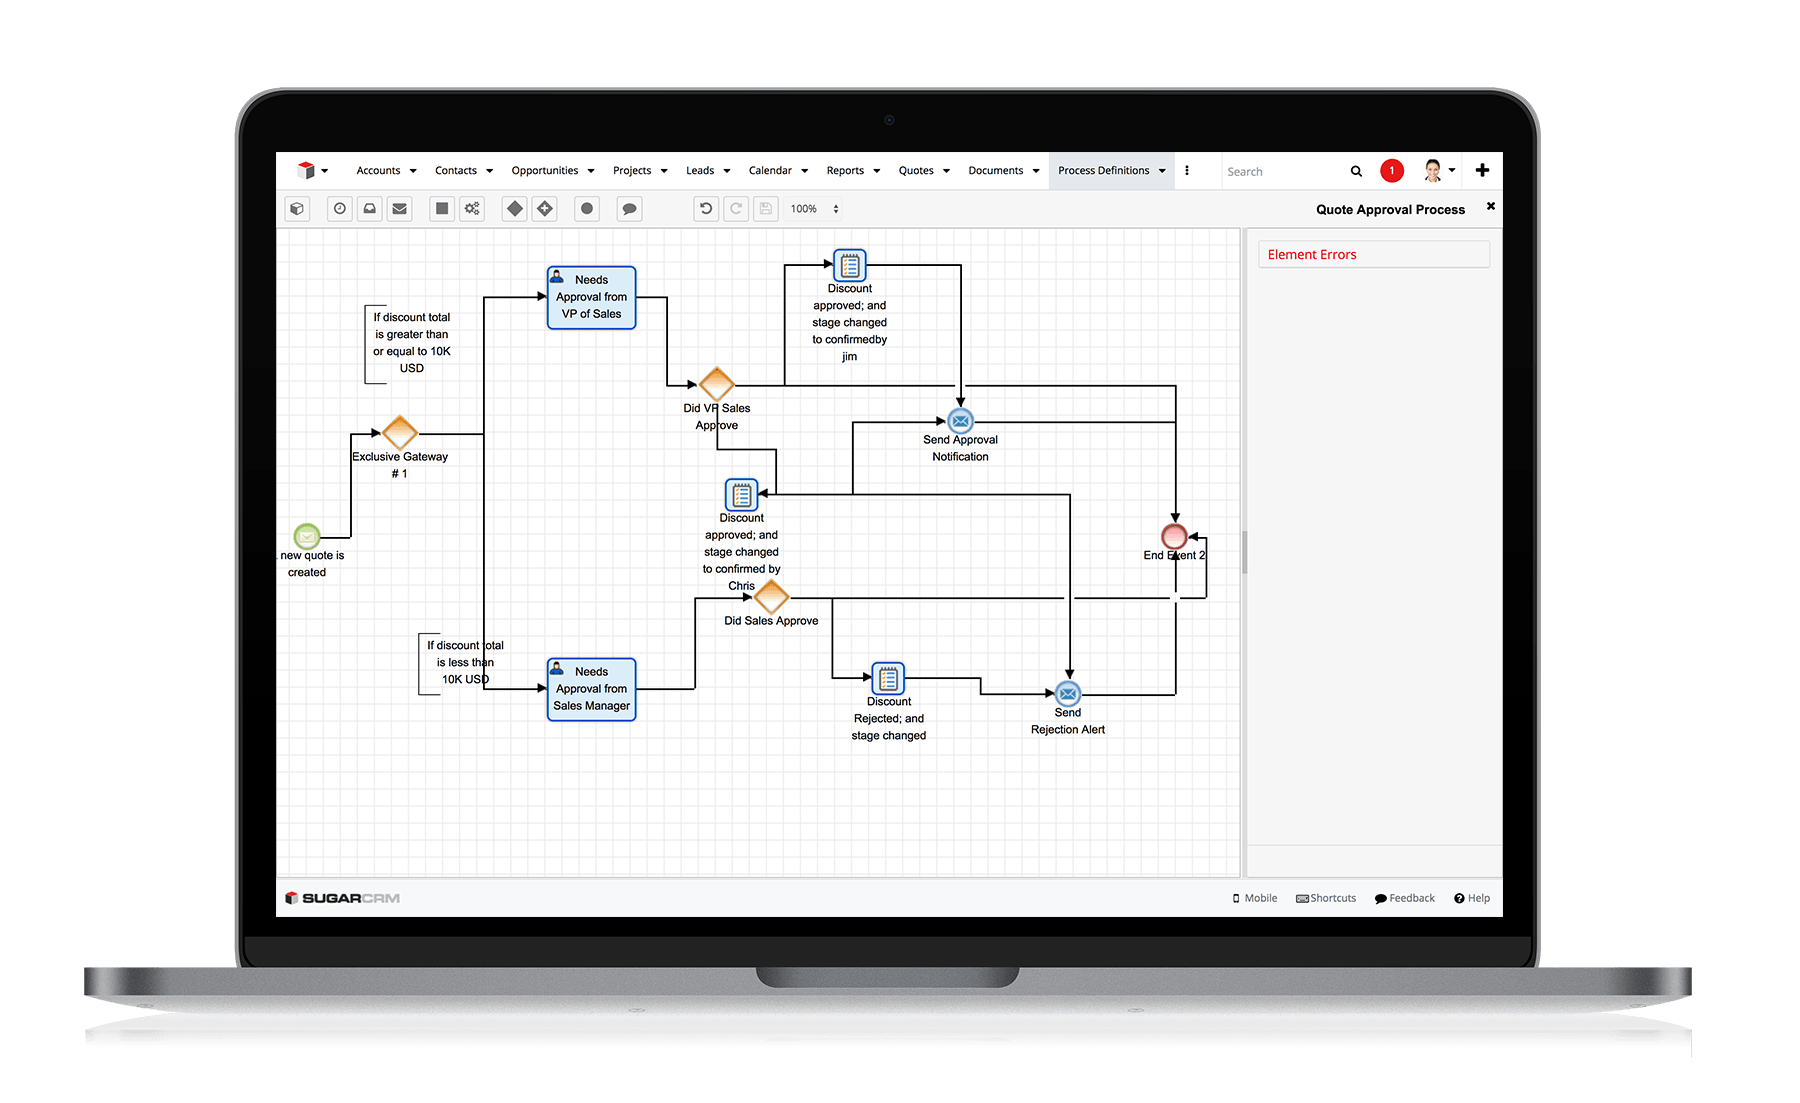 Screenshot showing an advanced workflow in SugarCRM.